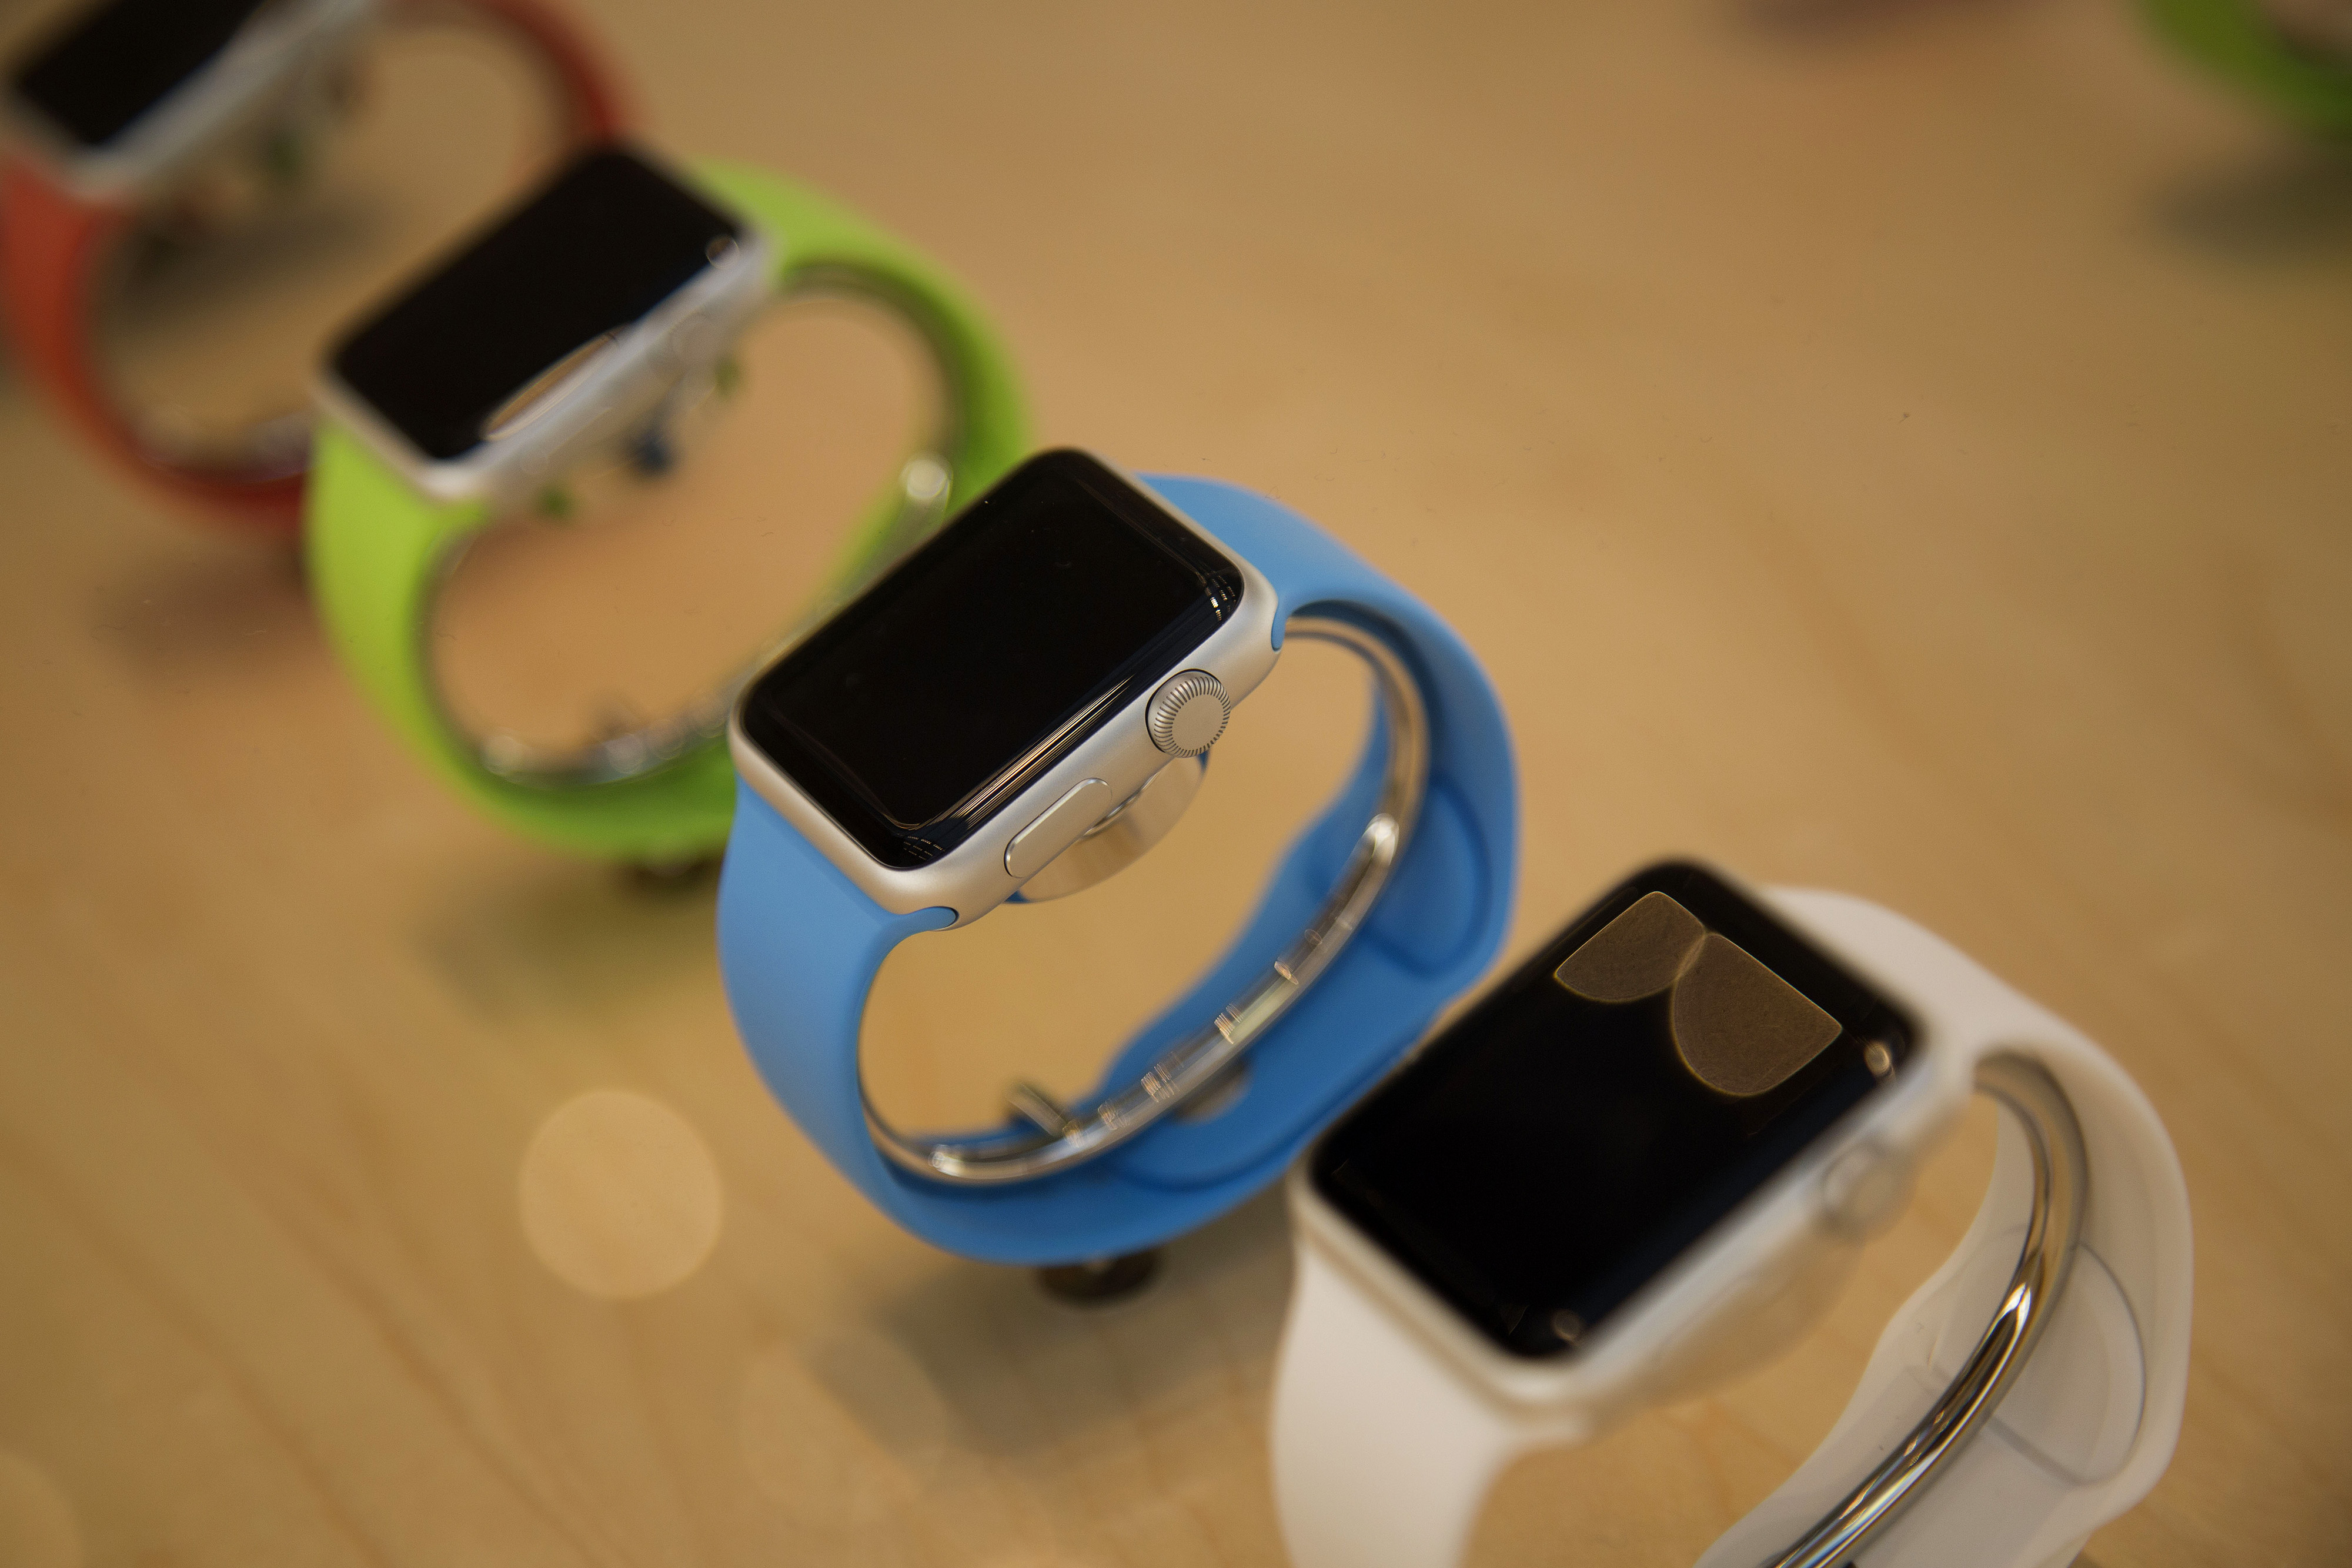 The Apple Watch Sport edition is displayed at an Apple Inc. store in New York, U.S., on Friday, April 10, 2015. (Michael Nagle—Bloomberg/Getty Images)